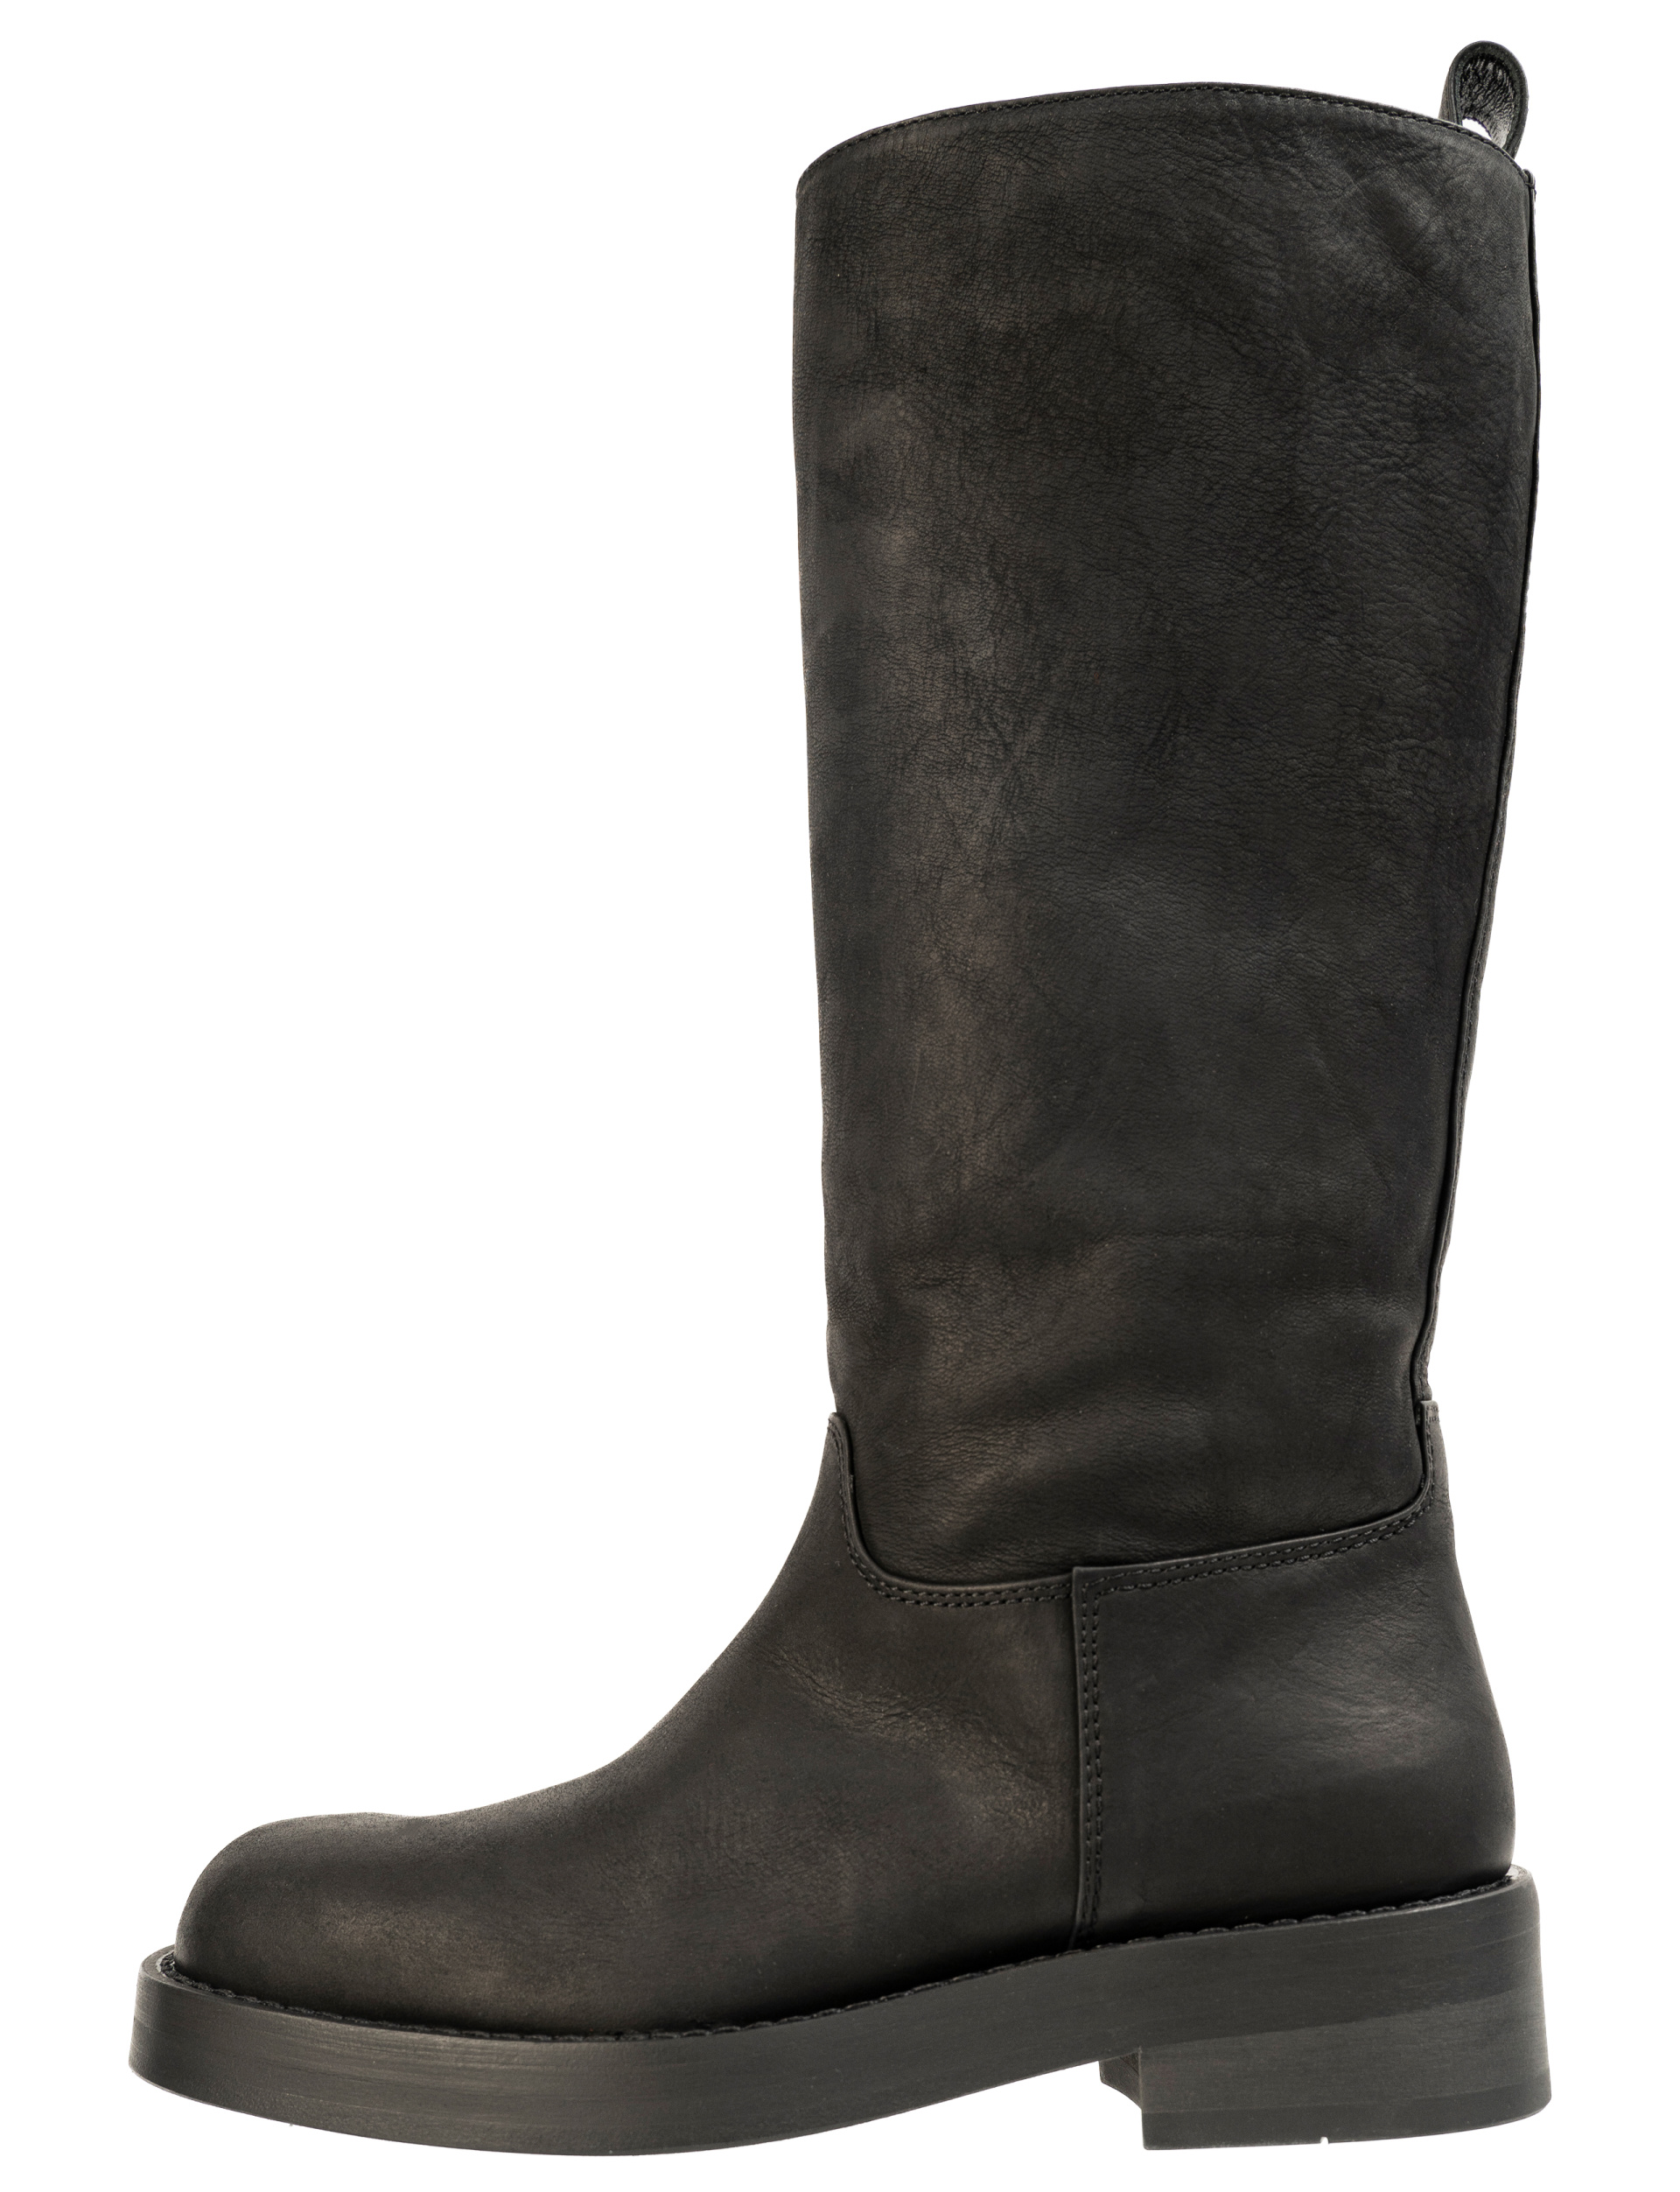 Ann Demeulemeester Jose boots dusty leather